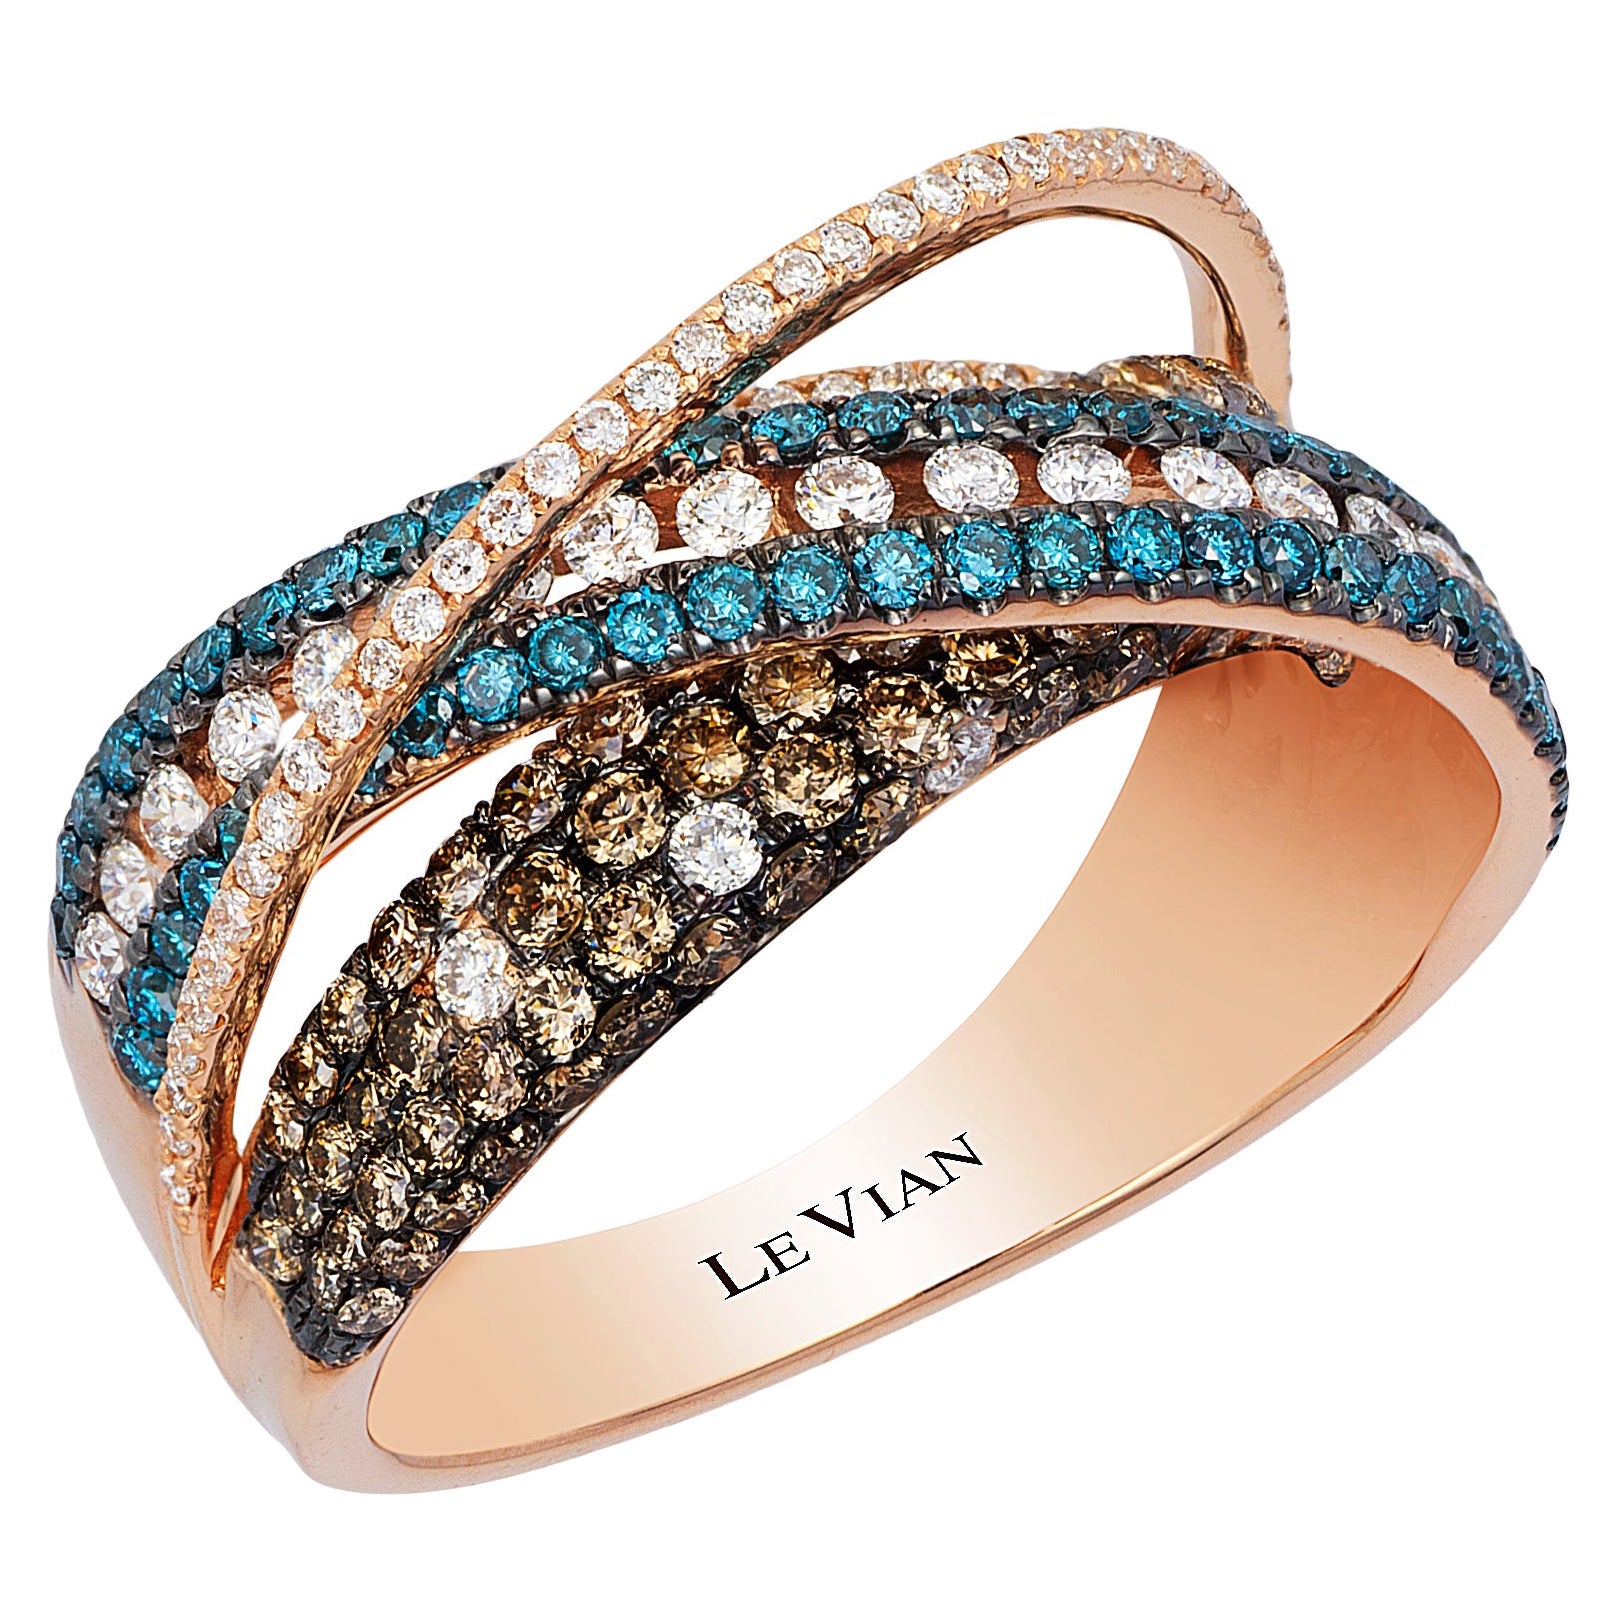 LeVian 14K Rose Gold Round Blue Chocolate Brown Diamond Pretty Cocktail Ring